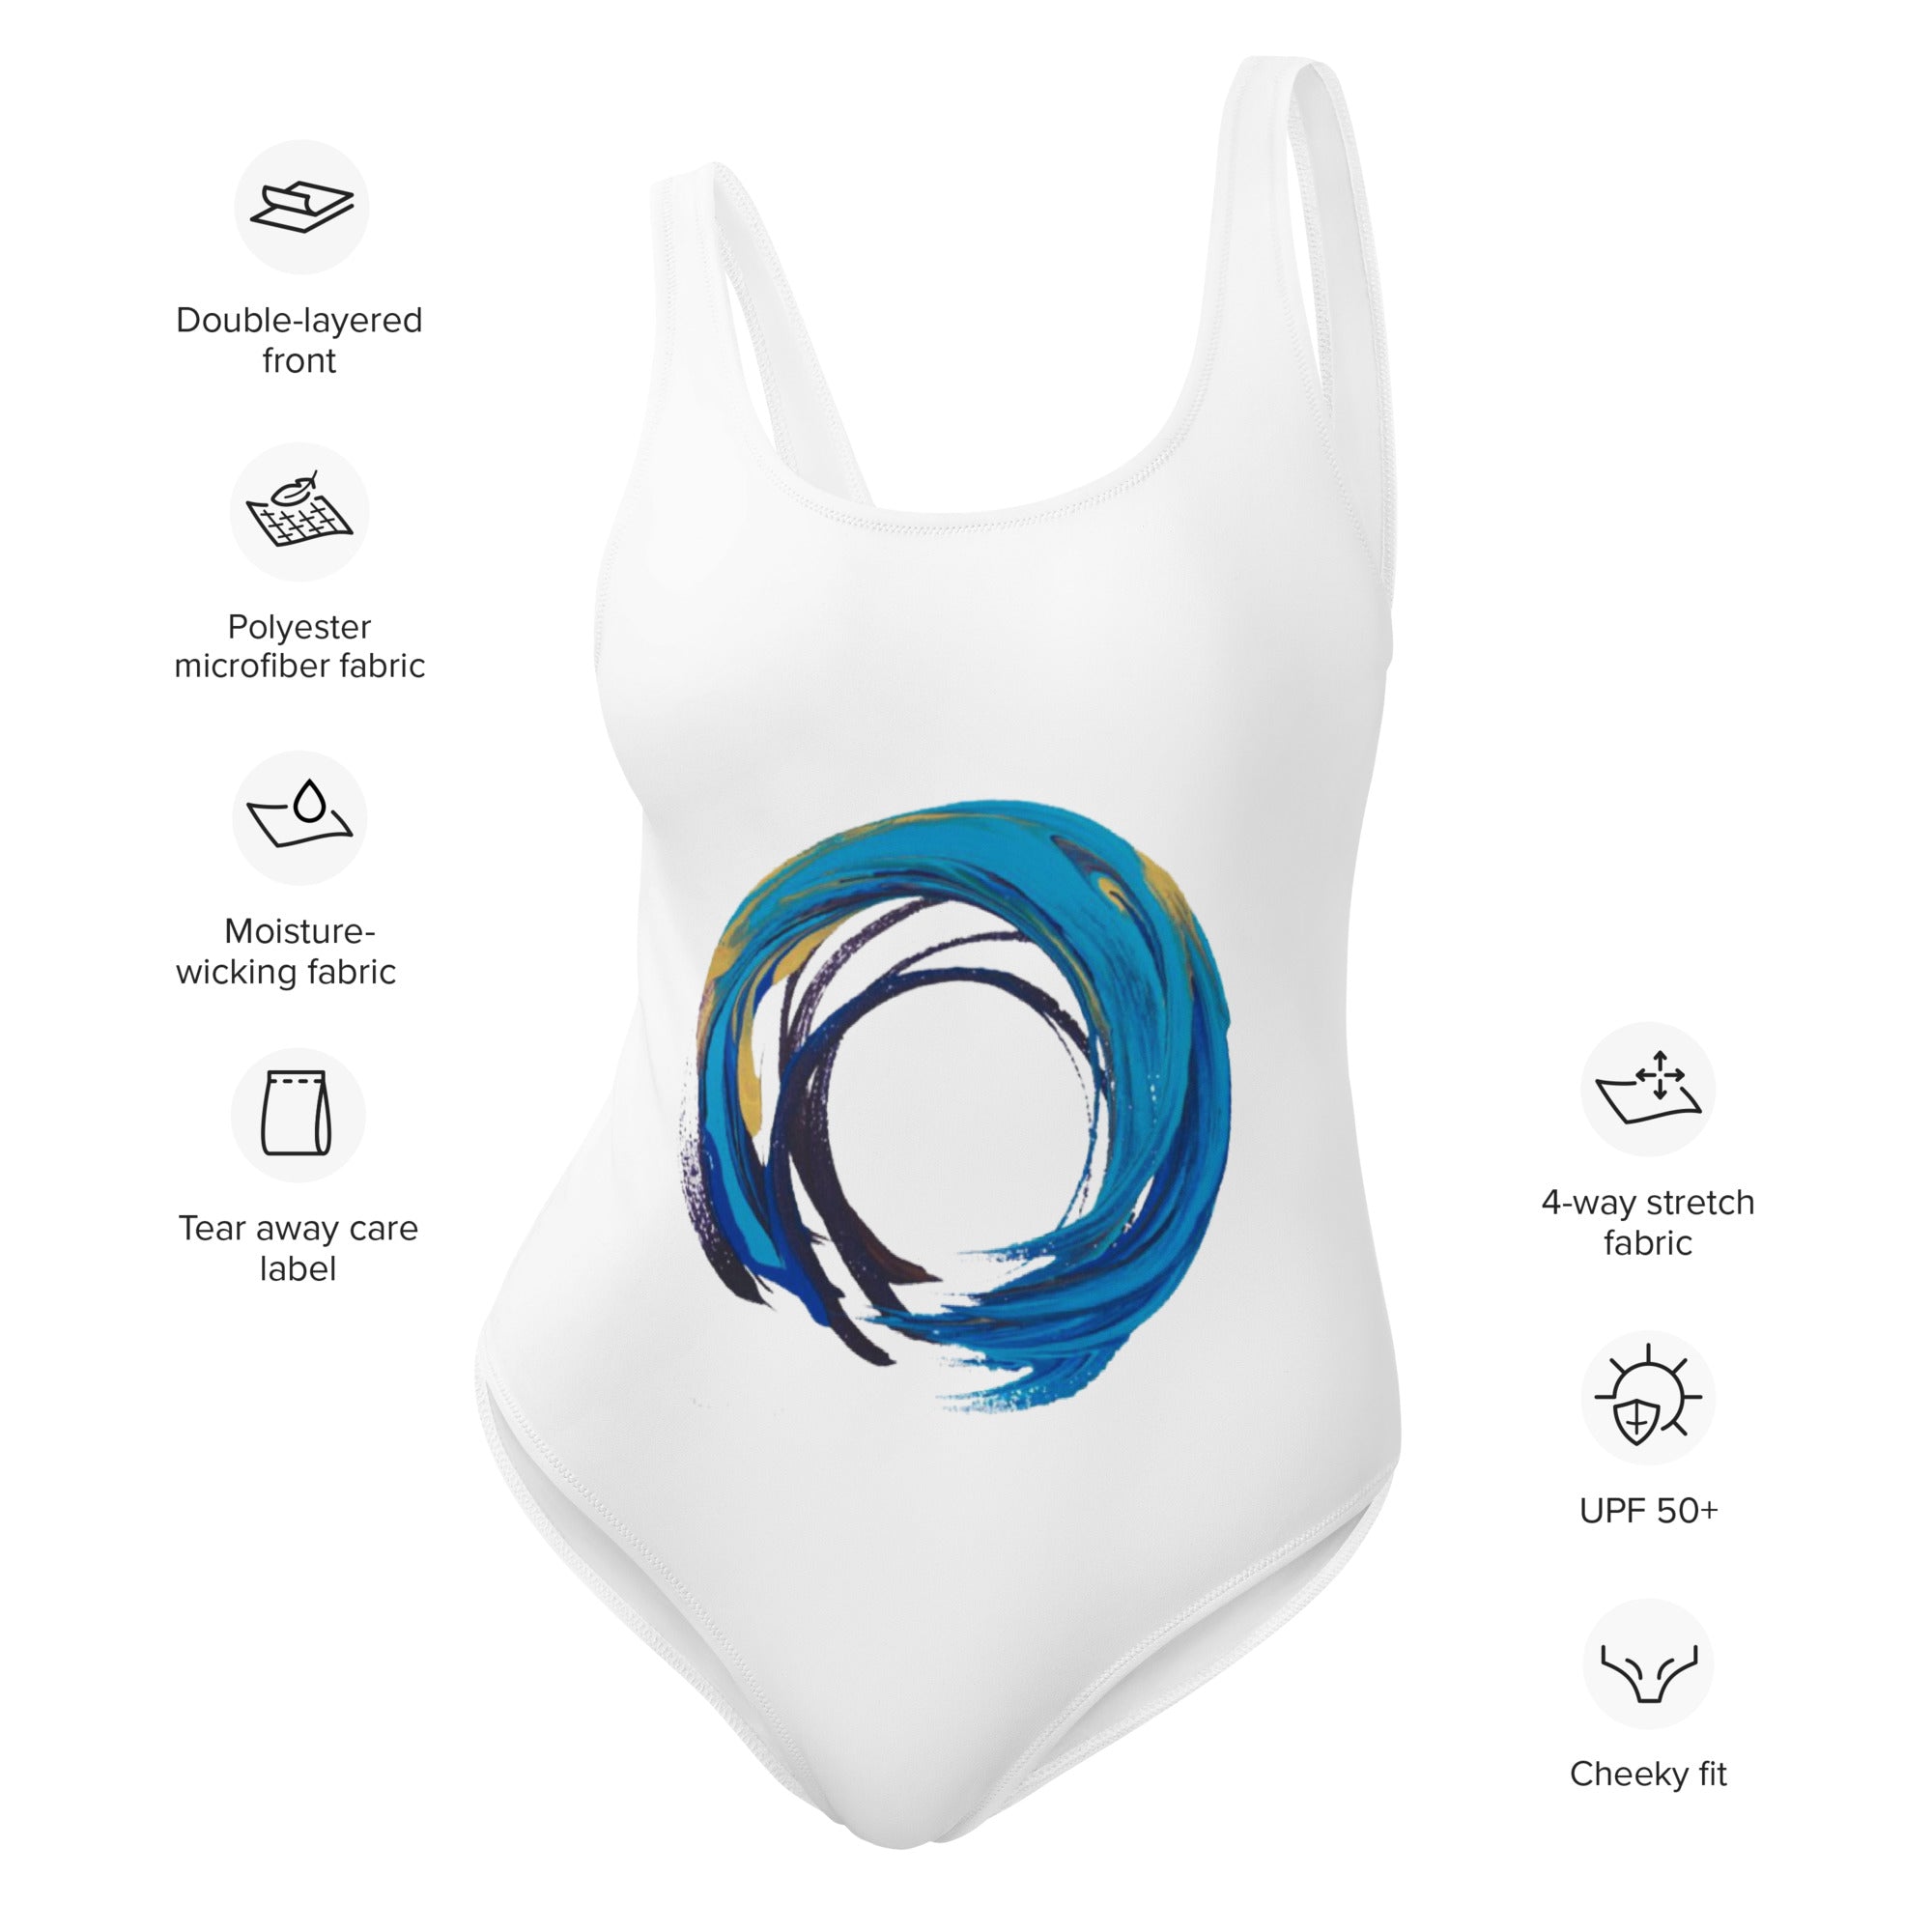 Water Yoga One-Piece Swimsuit - Personal Hour for Yoga and Meditations 